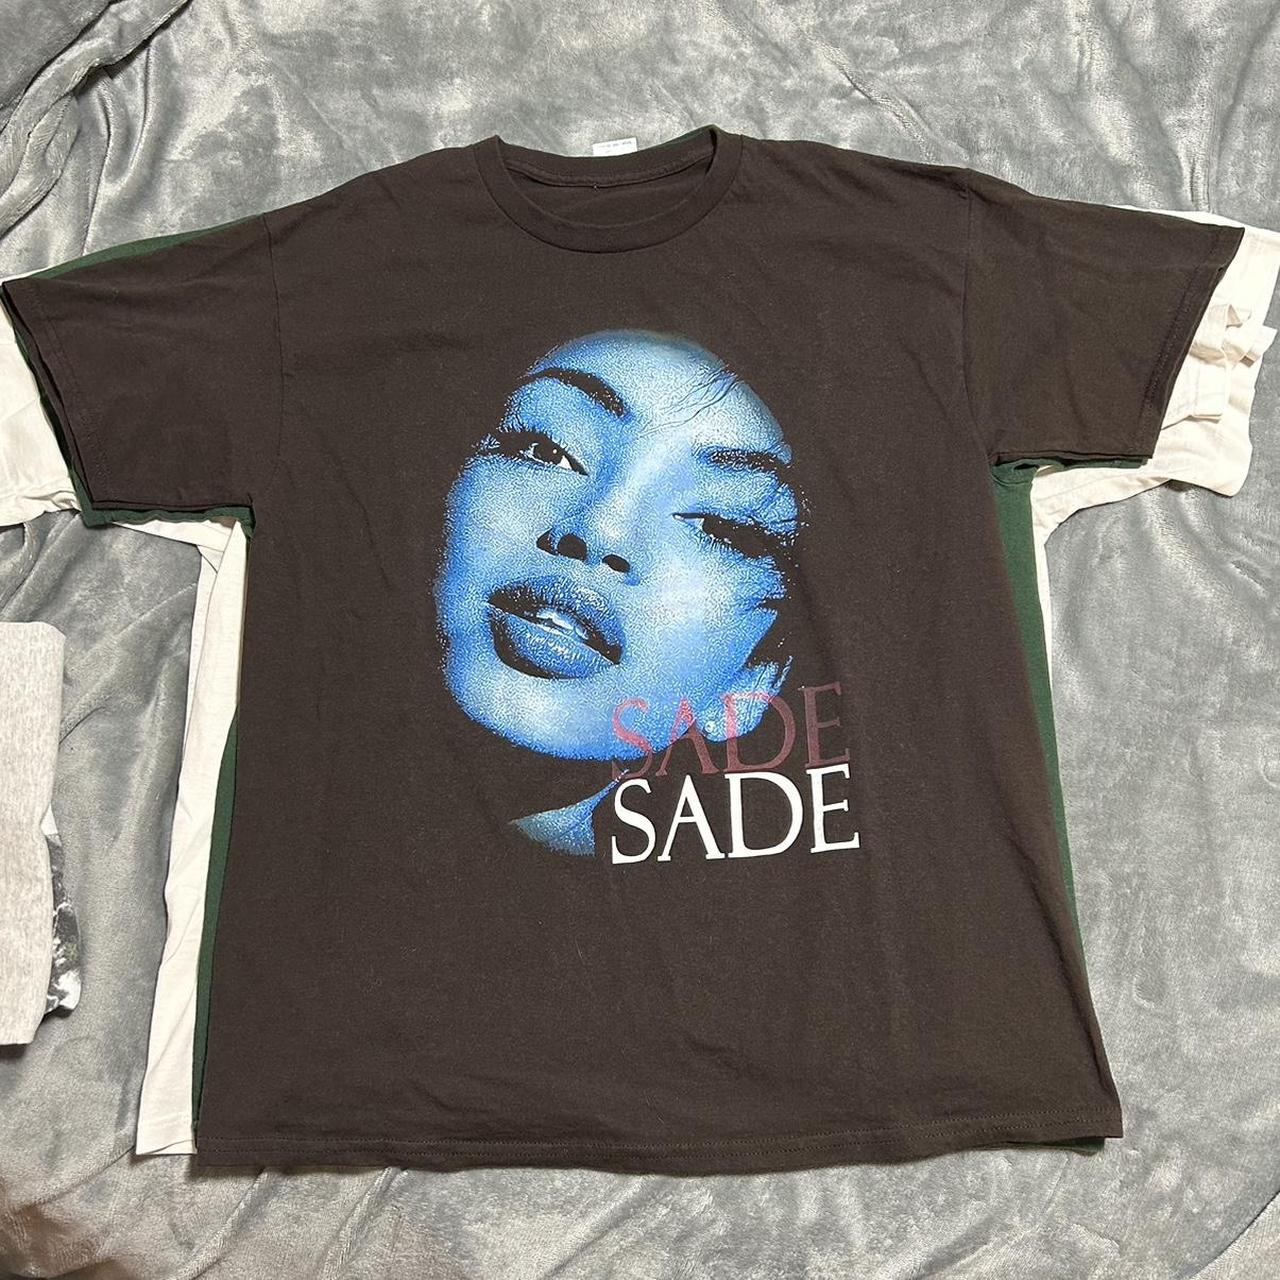 Sade reprint tee Great condition Message with... - Depop